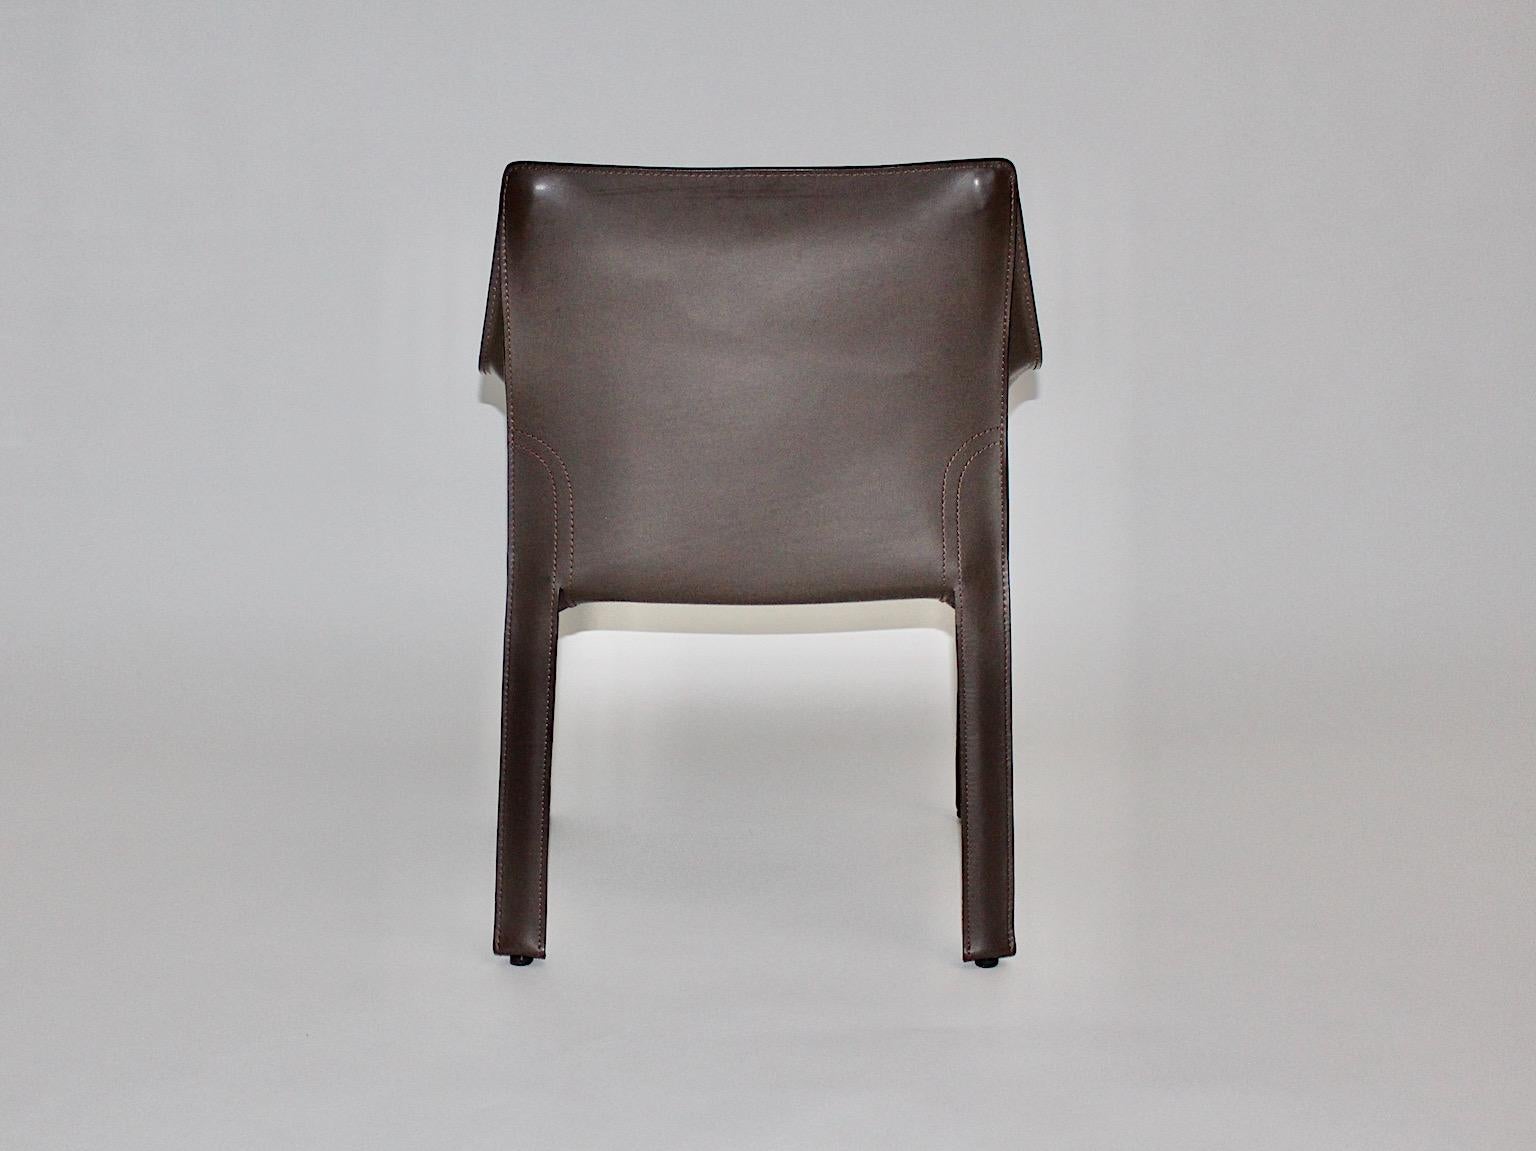 Mario Bellini Vintage Chocolate Brown Leather Dining Chairs Cassina 1970s Italy For Sale 4